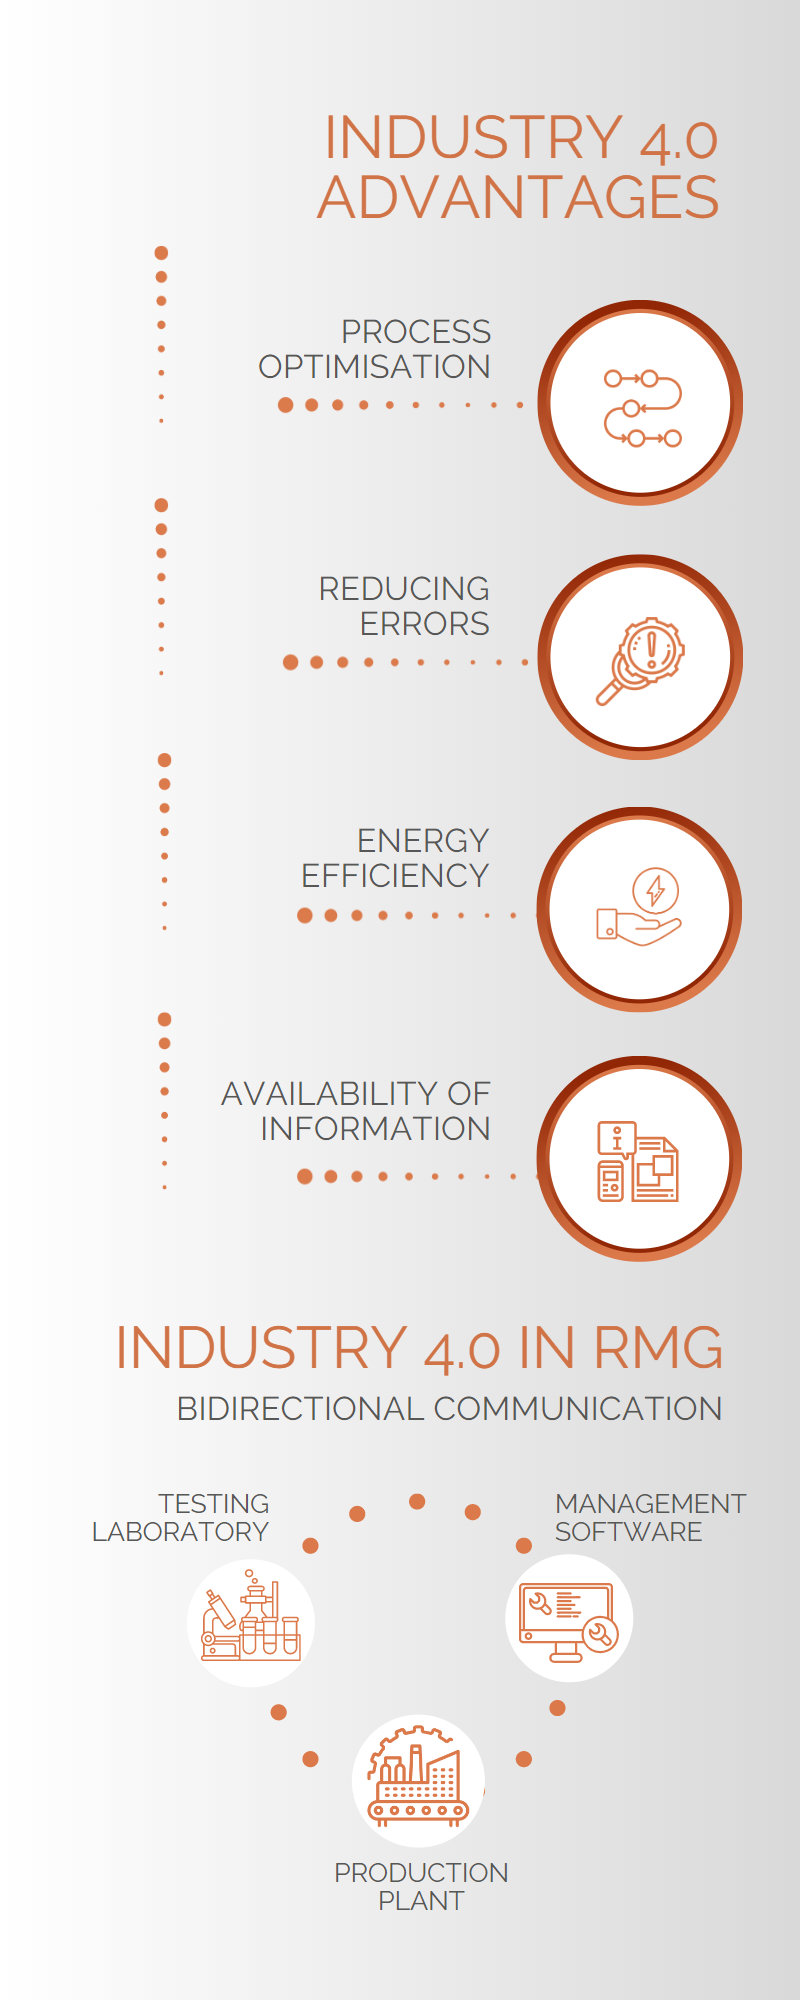 Functioning in RMG and advantages of industry 4.0: Process optimisation, Reducing errors, Energy efficiency, Availability of information